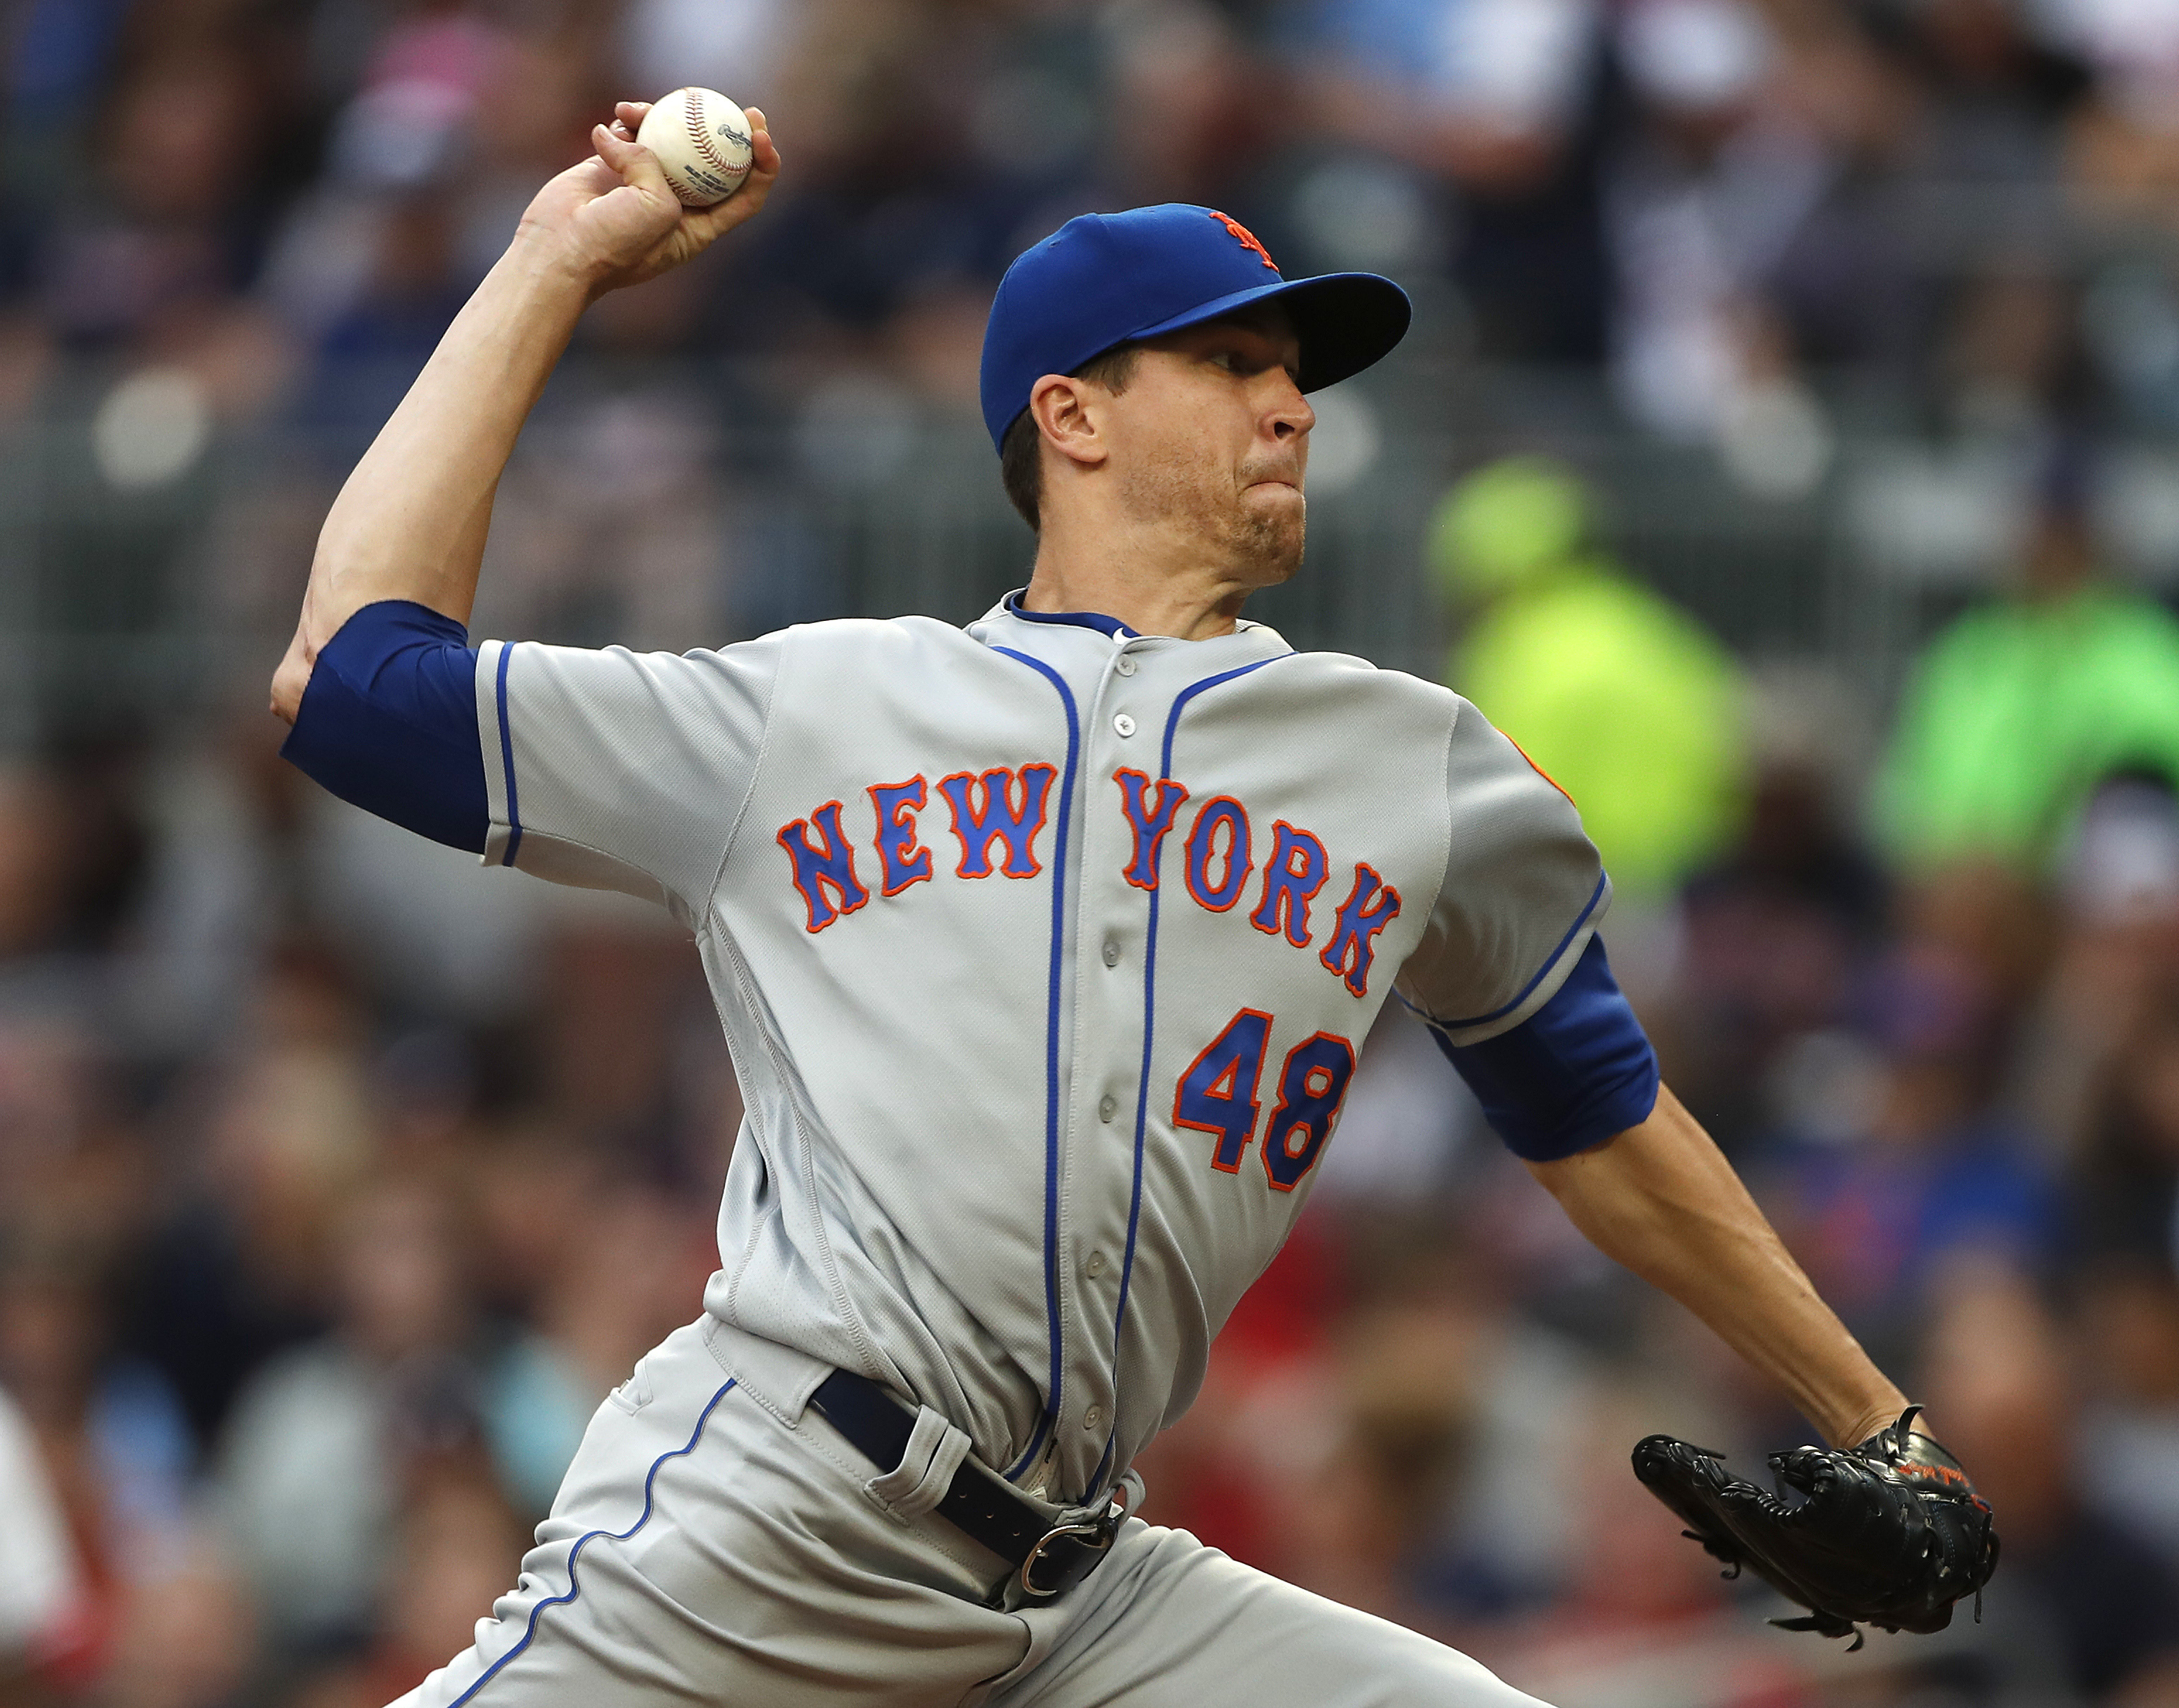 Jason deGrom, Alonso lead Mets past East-leading Braves 10-2